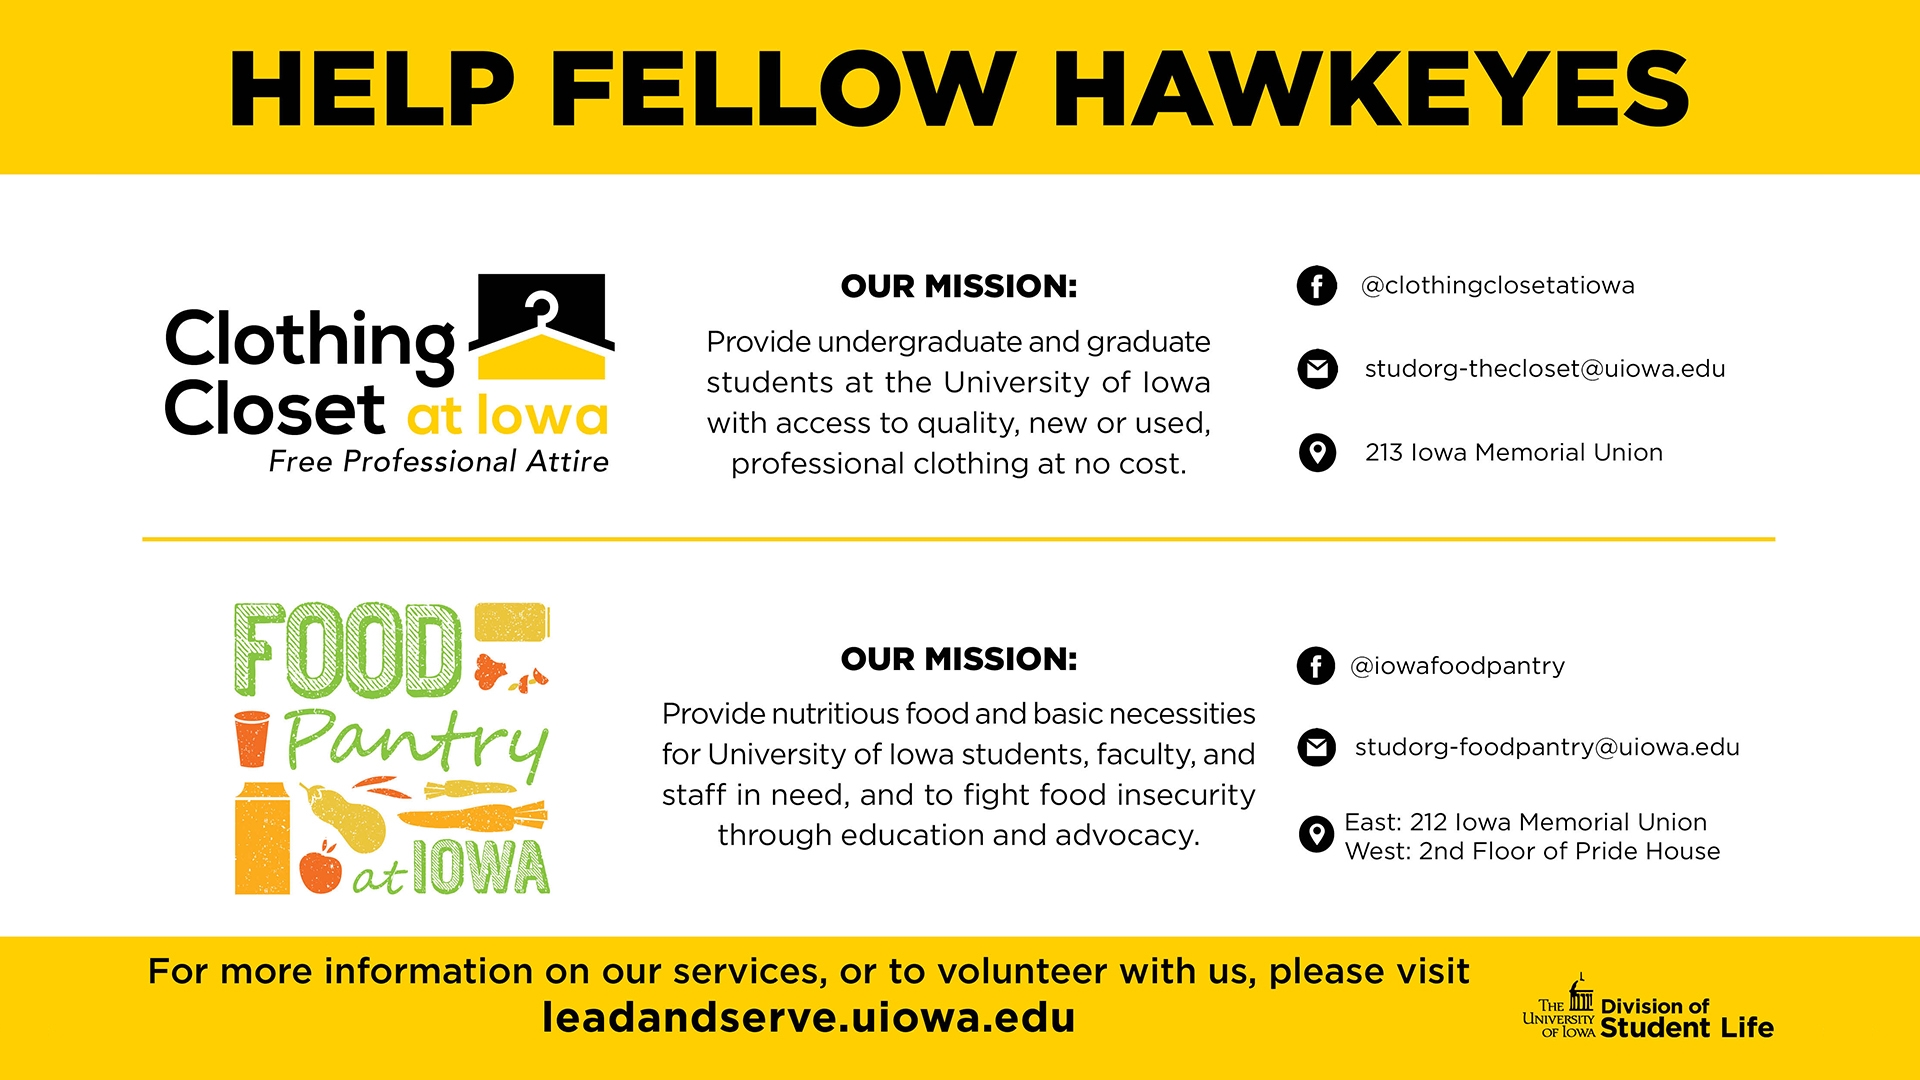 Help fellow Hawkeyes at Clothing Closet at Iowa and Food Pantry at Iowa. For more information on our services, or to volunteer with us, please visit: https://leadandserve.uiowa.edu.